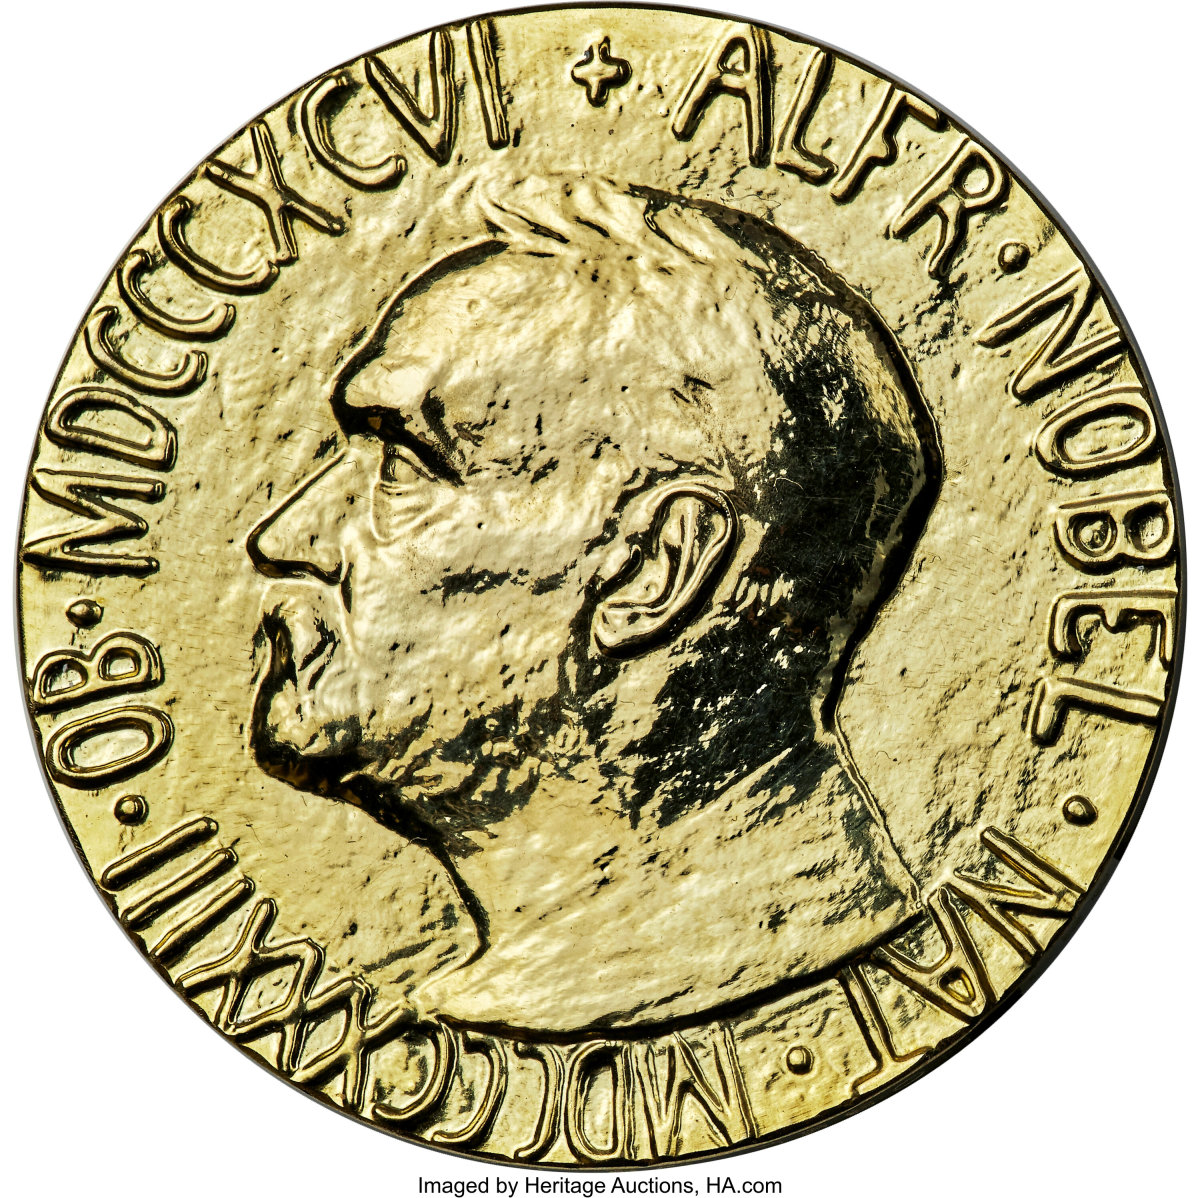 Russian Journalist’s Nobel Prize Medal Tops Numismatic Records